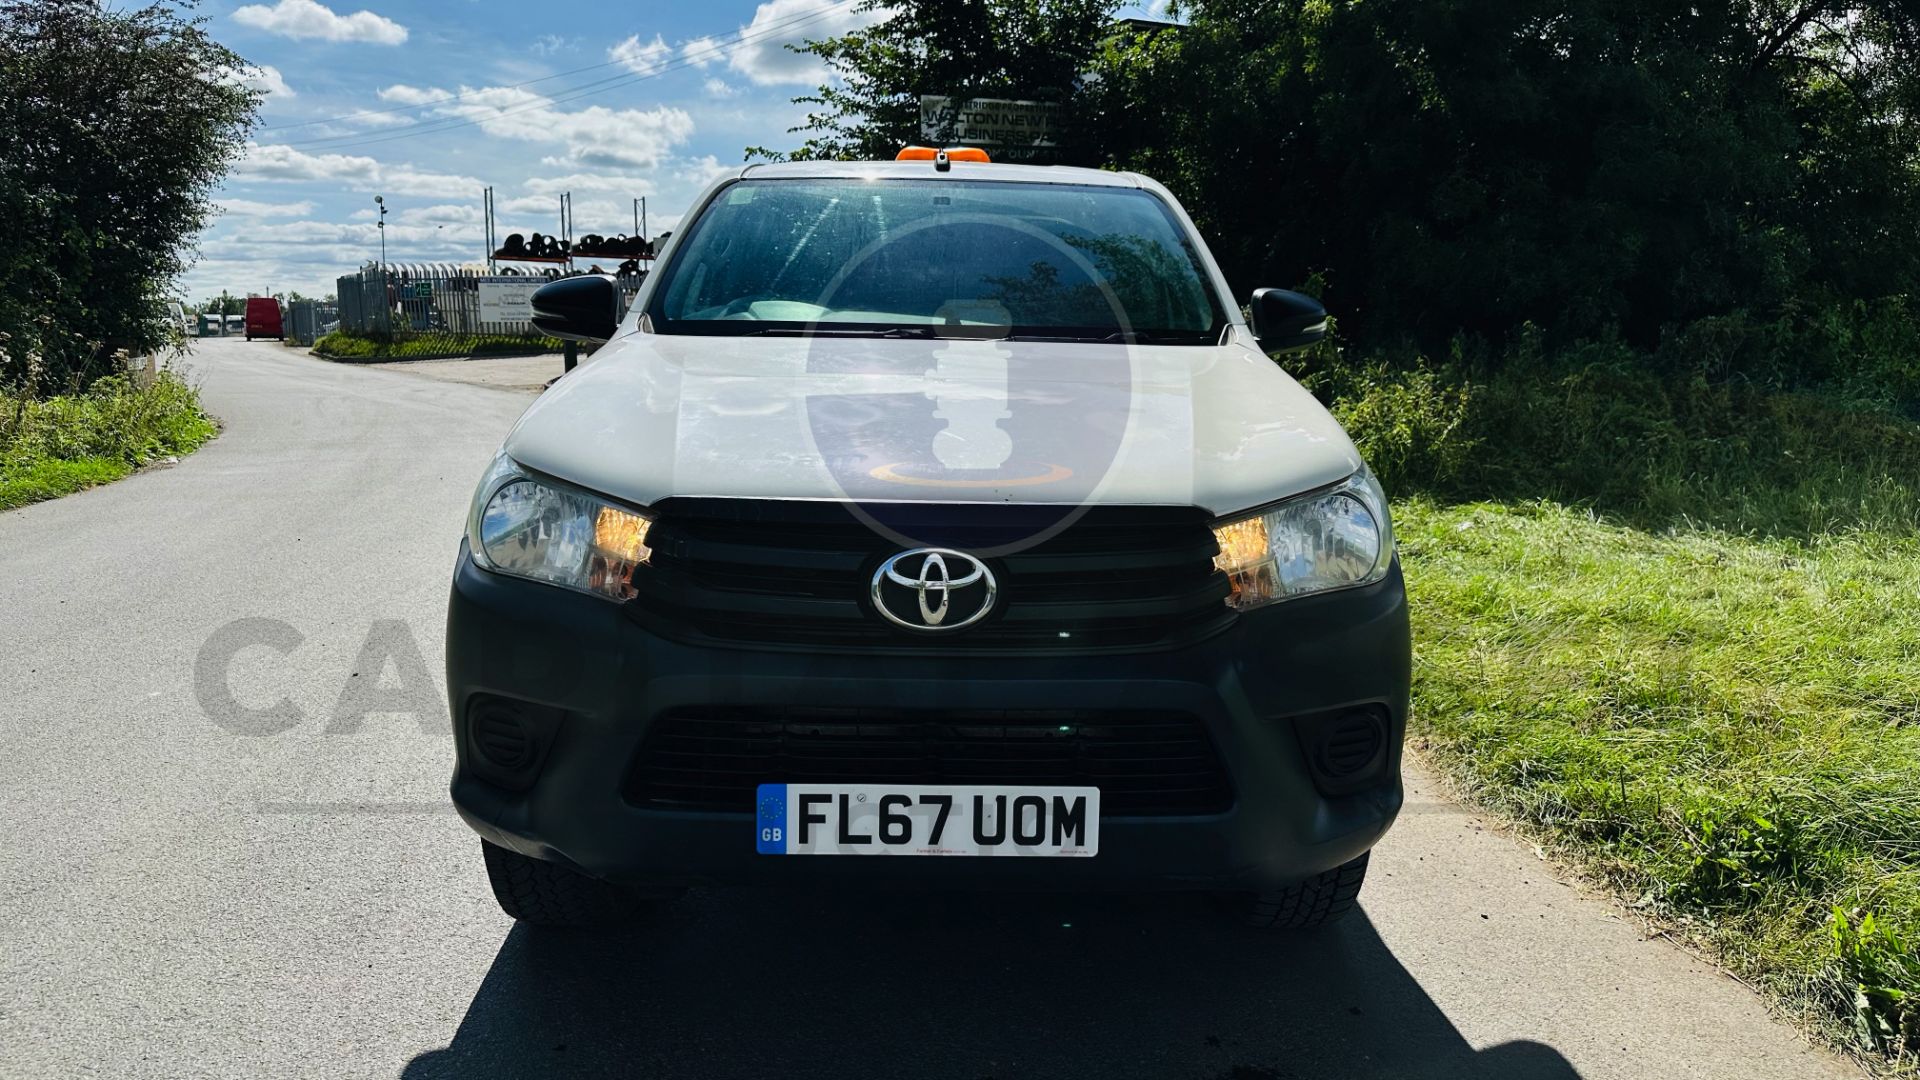 (ON SALE) TOYOTA HILUX *DOUBLE CAB PICK-UP* (2018 - EURO 6) 2.4 D-4D - AUTO STOP/START *AIR CON* - Image 4 of 41